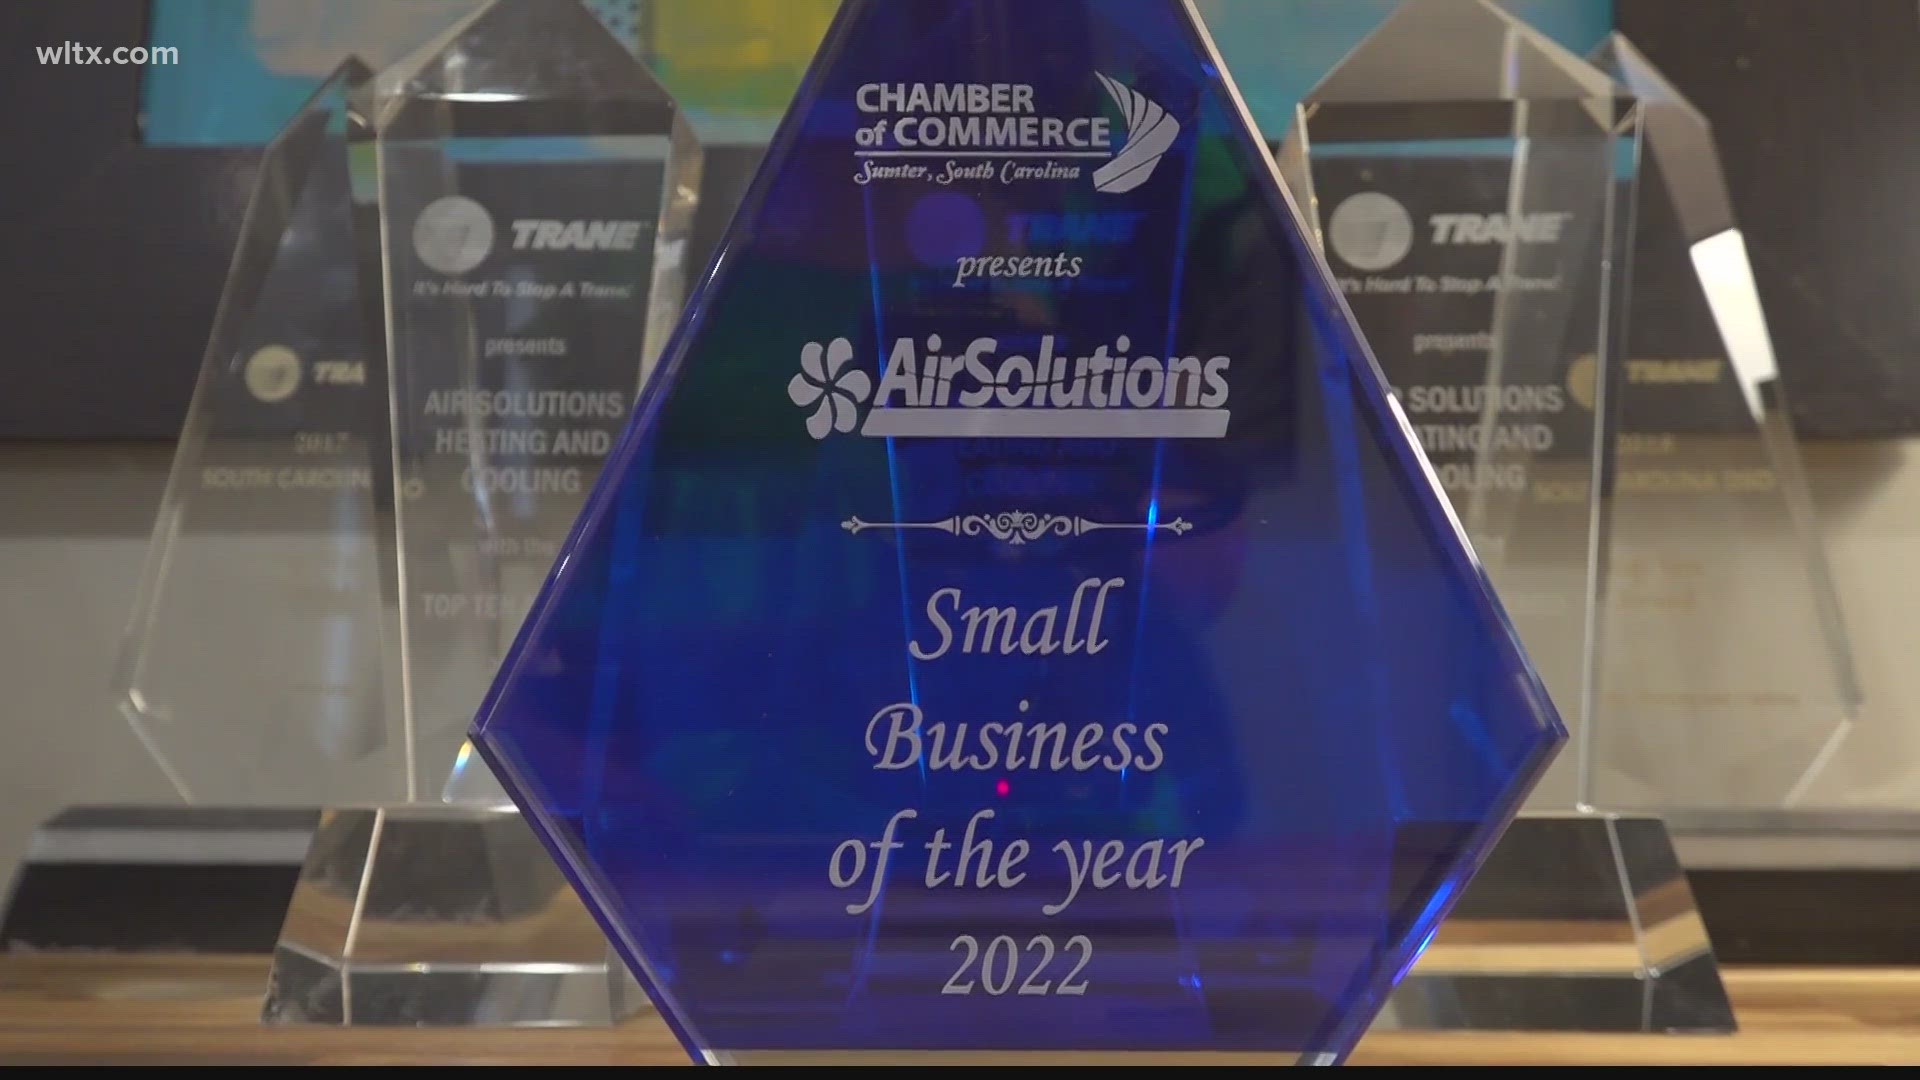 The Sumter Chamber of Commerce says supporting small businesses matters as they are the "backbone of Sumter"